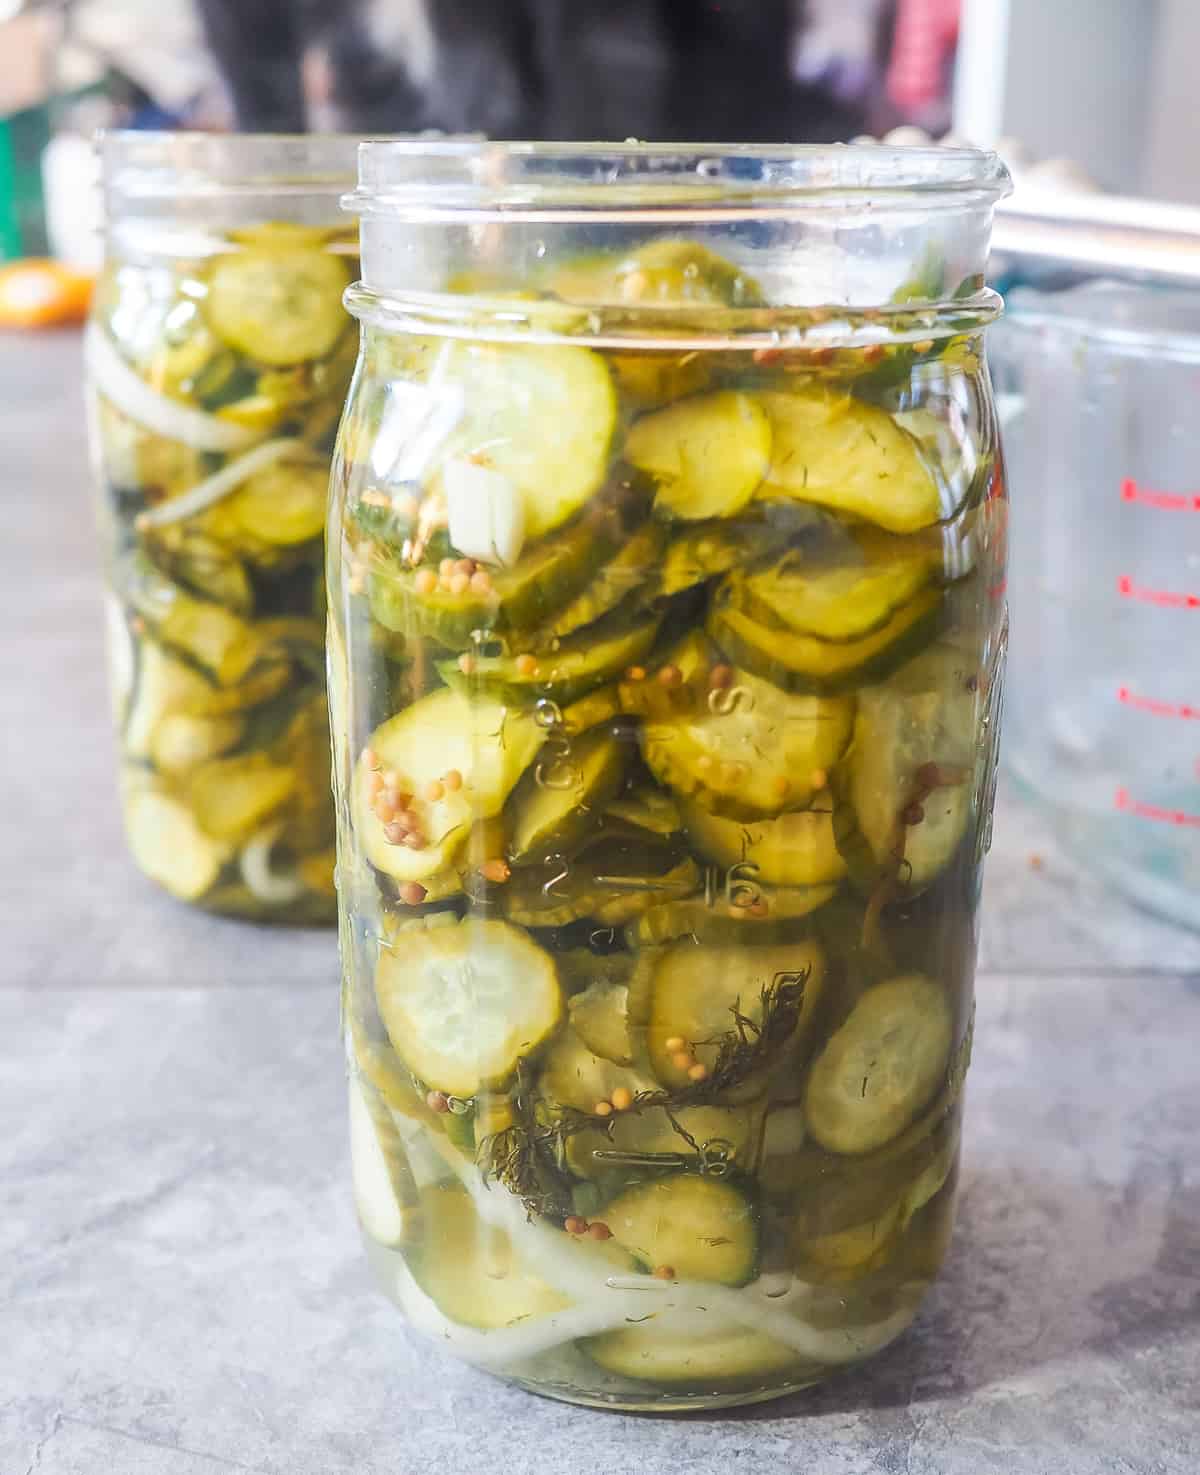 Two jars of homemade quick pickles with a dog in the background.